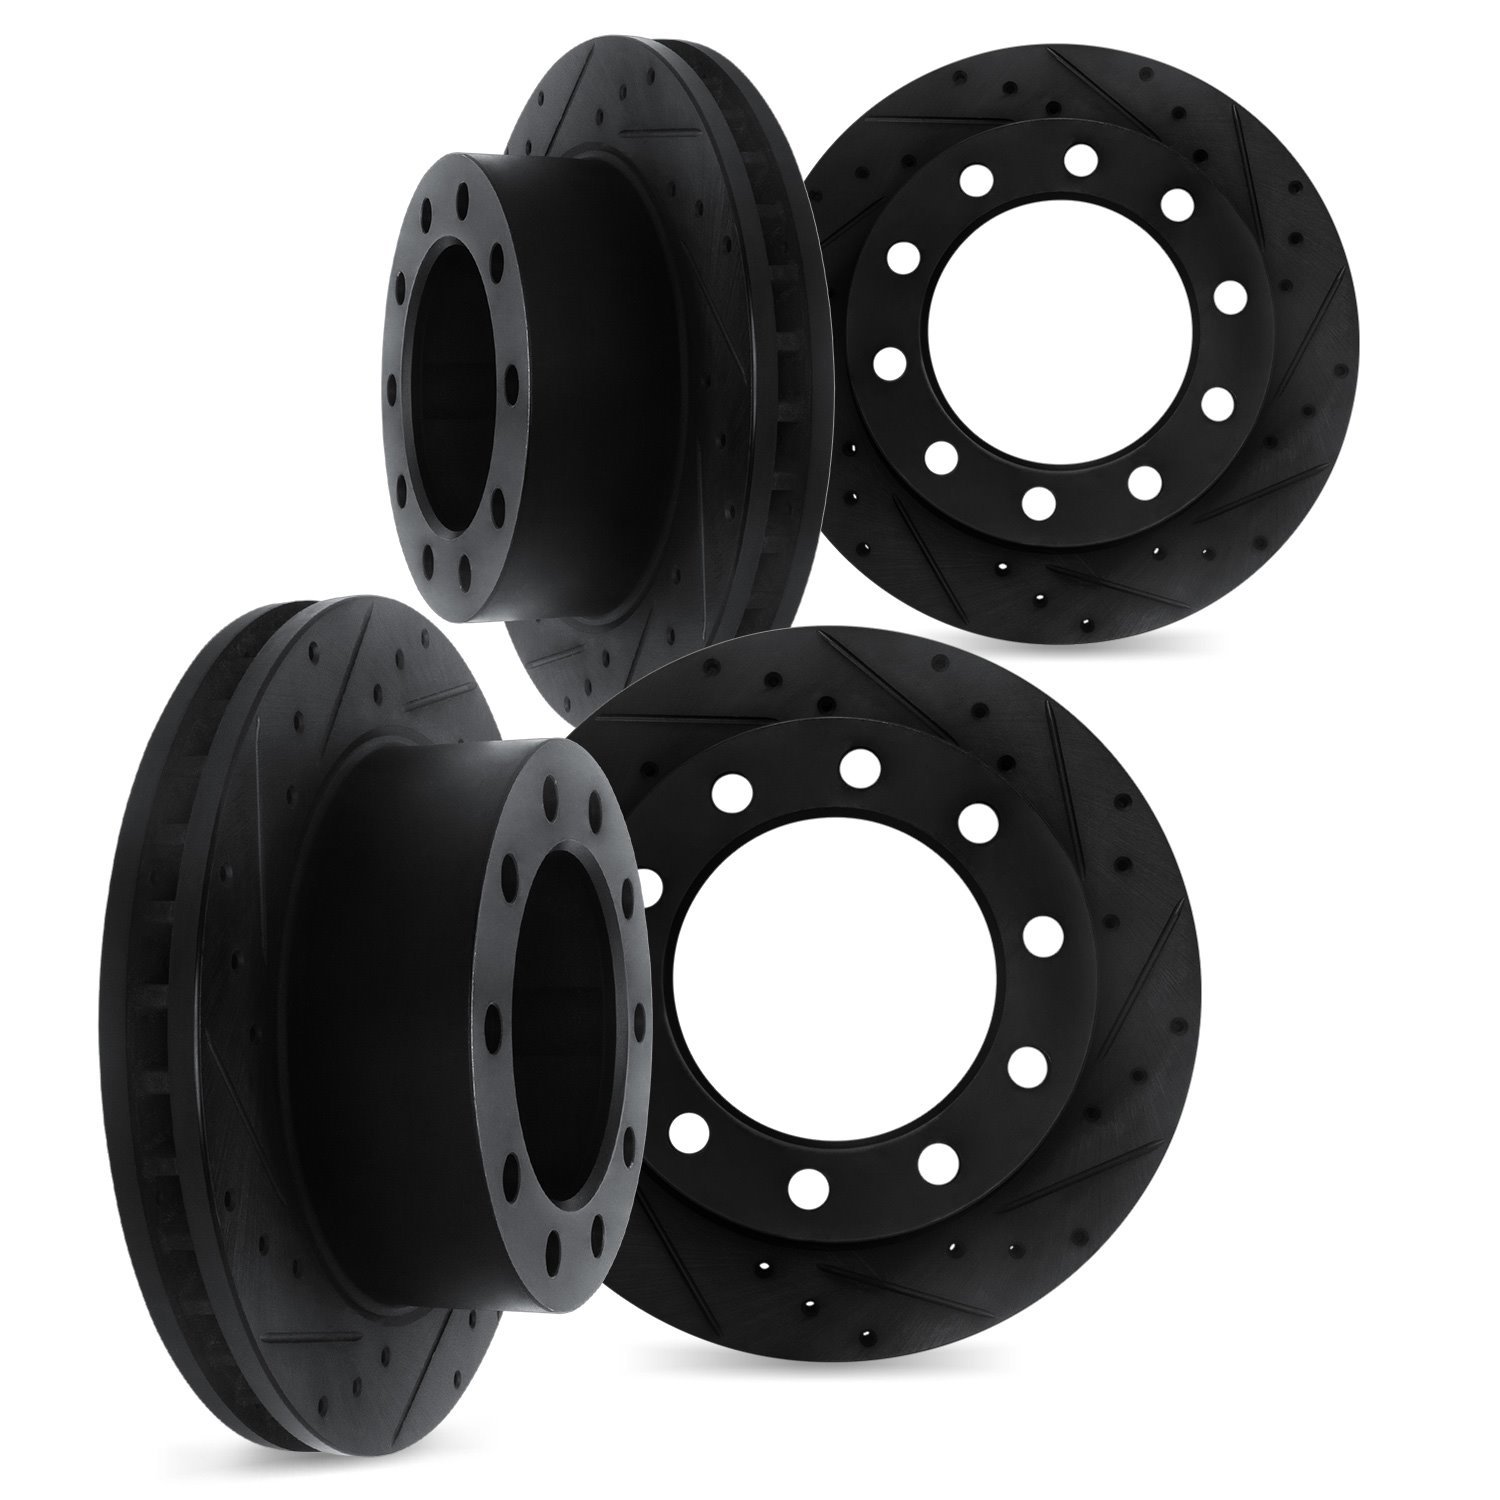 8004-54371 Drilled/Slotted Brake Rotors [Black], Fits Select Multiple Makes/Models, Position: Front and Rear